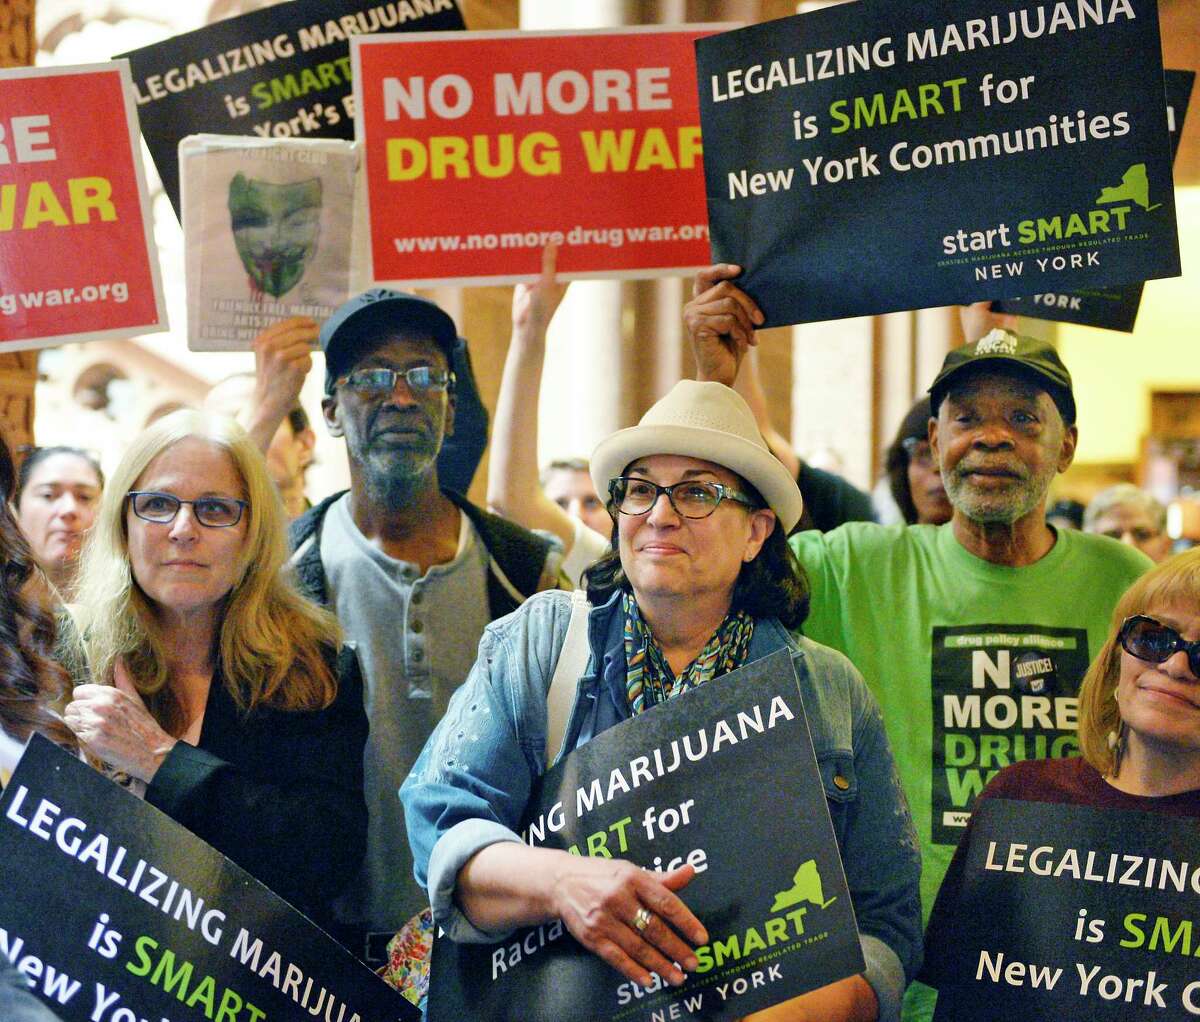 Advocates rally outside the Senate Chambers to demand marijuana legalization in New York at the Capitol Tuesday May 8, 2018 in Albany, NY. (John Carl D'Annibale/Times Union)